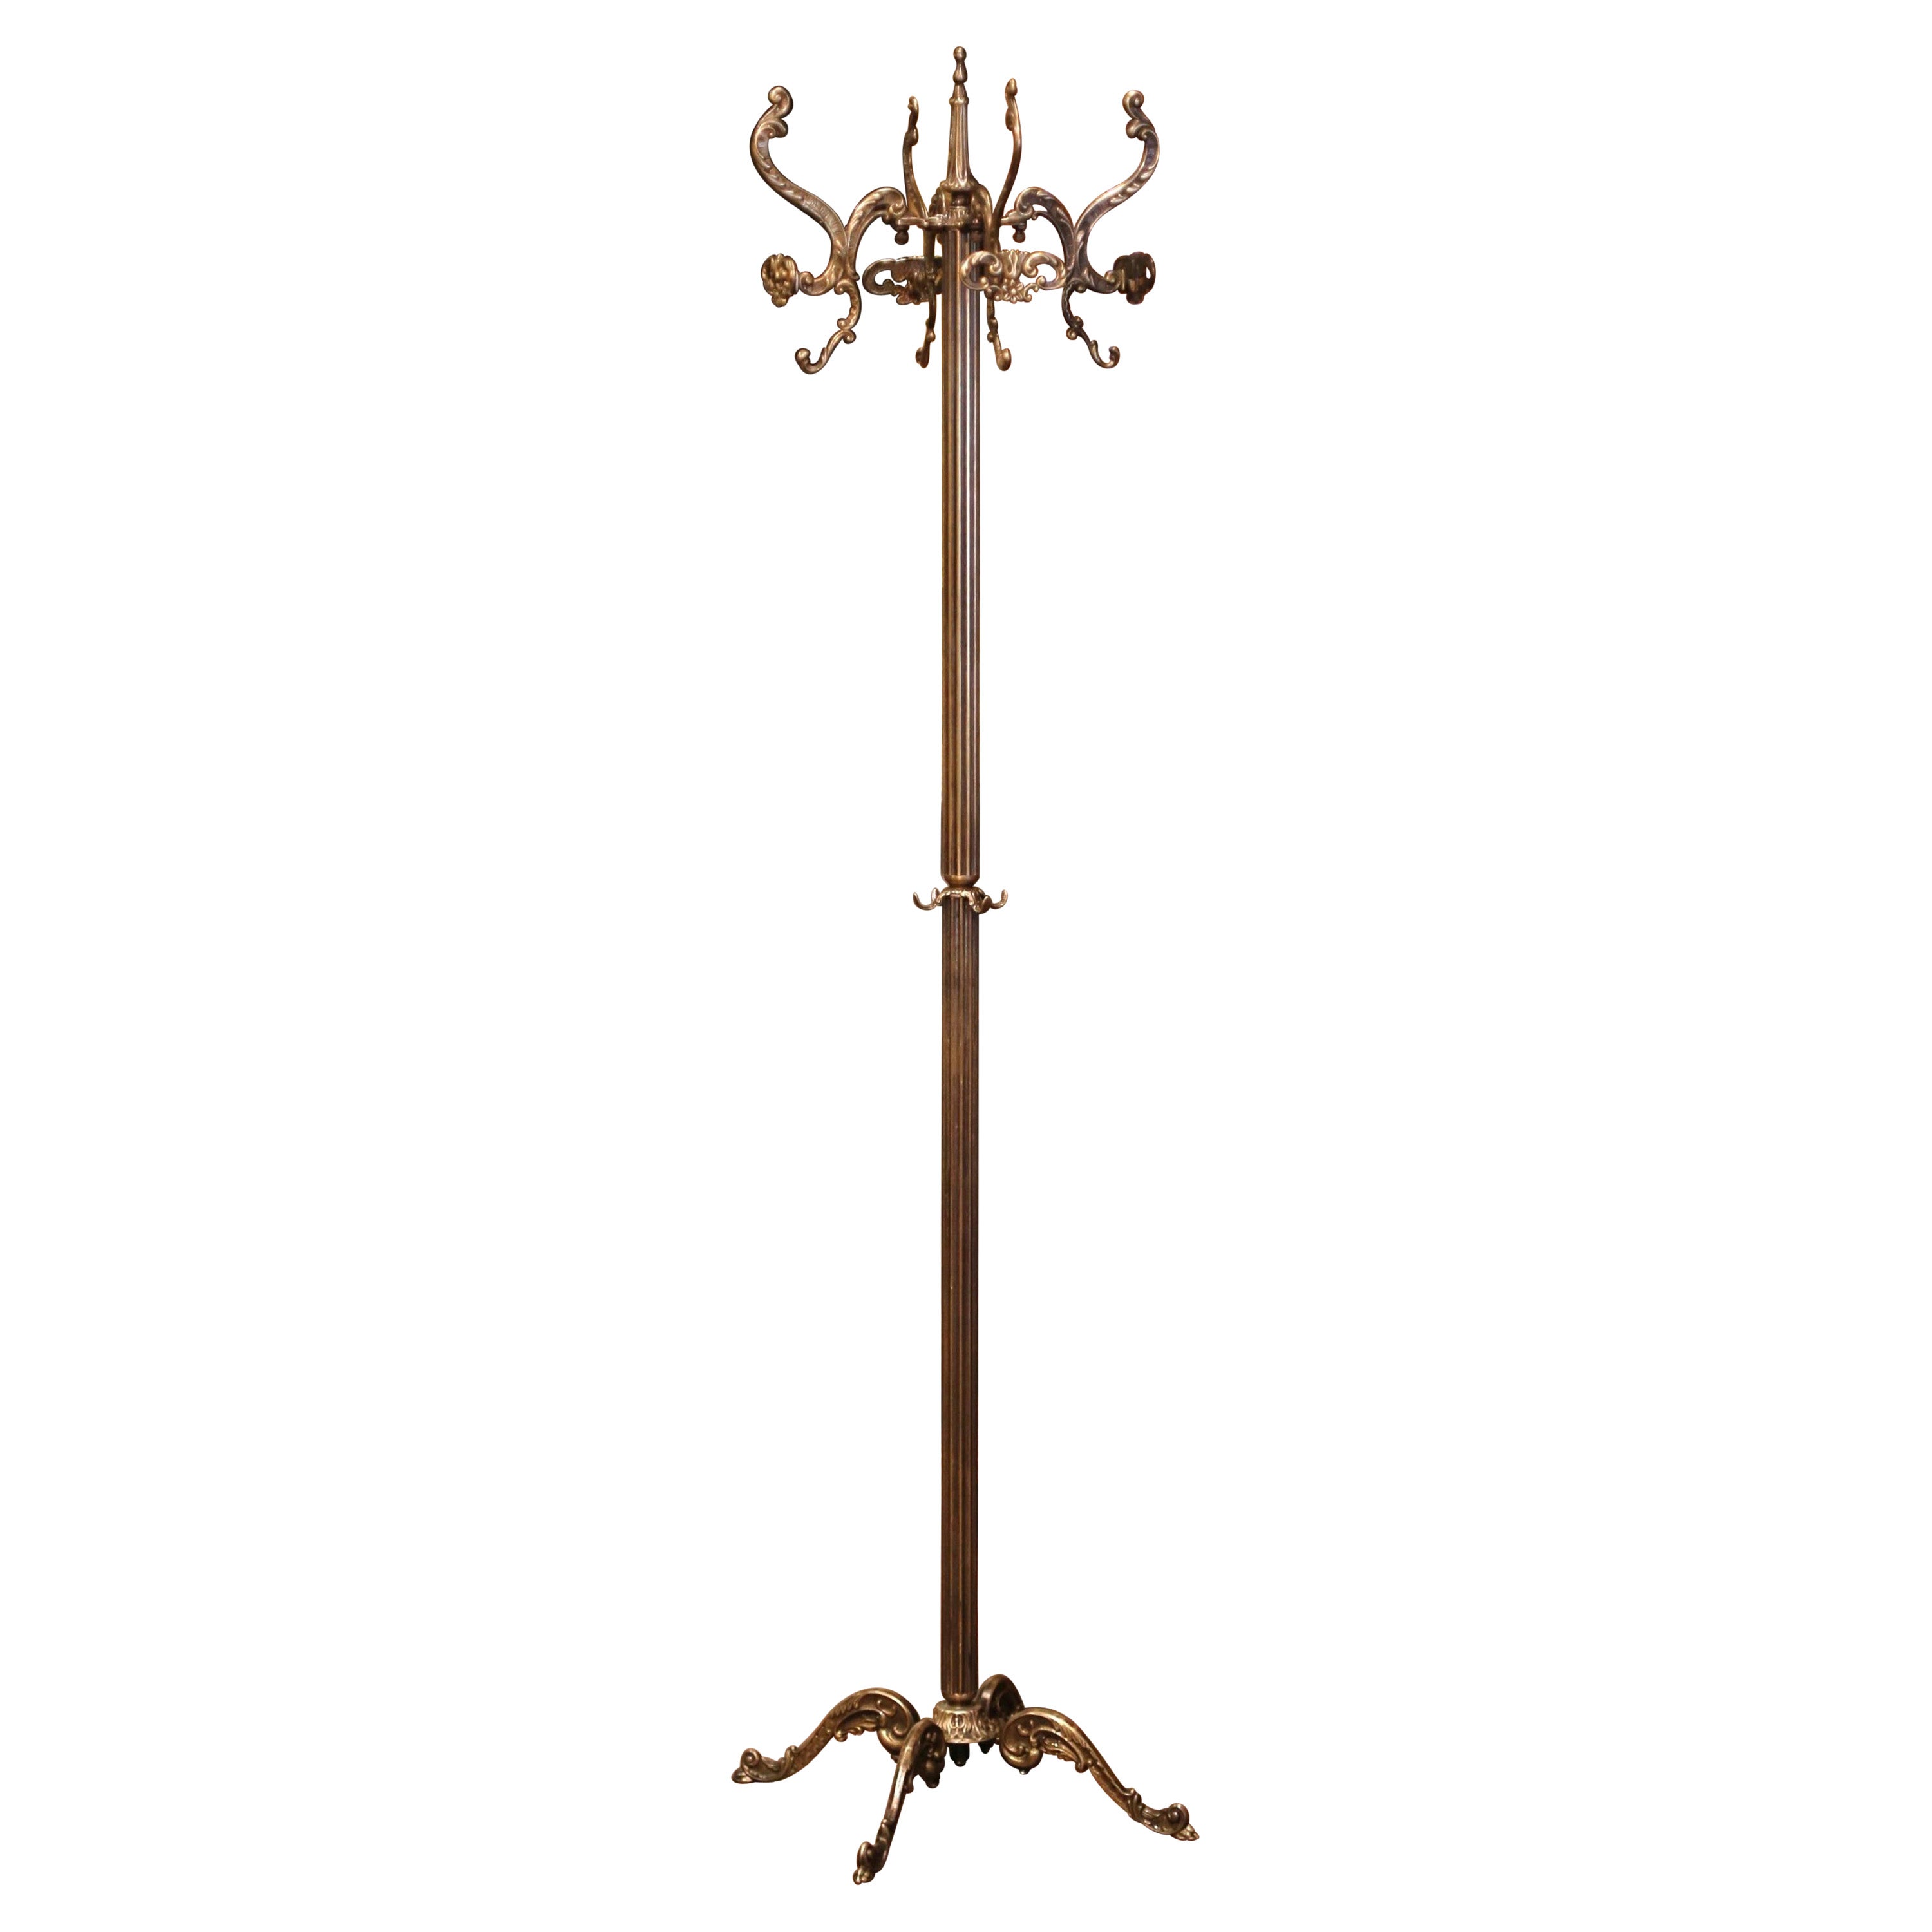 Early 20th Century French Gilt Brass Hall Tree Stand